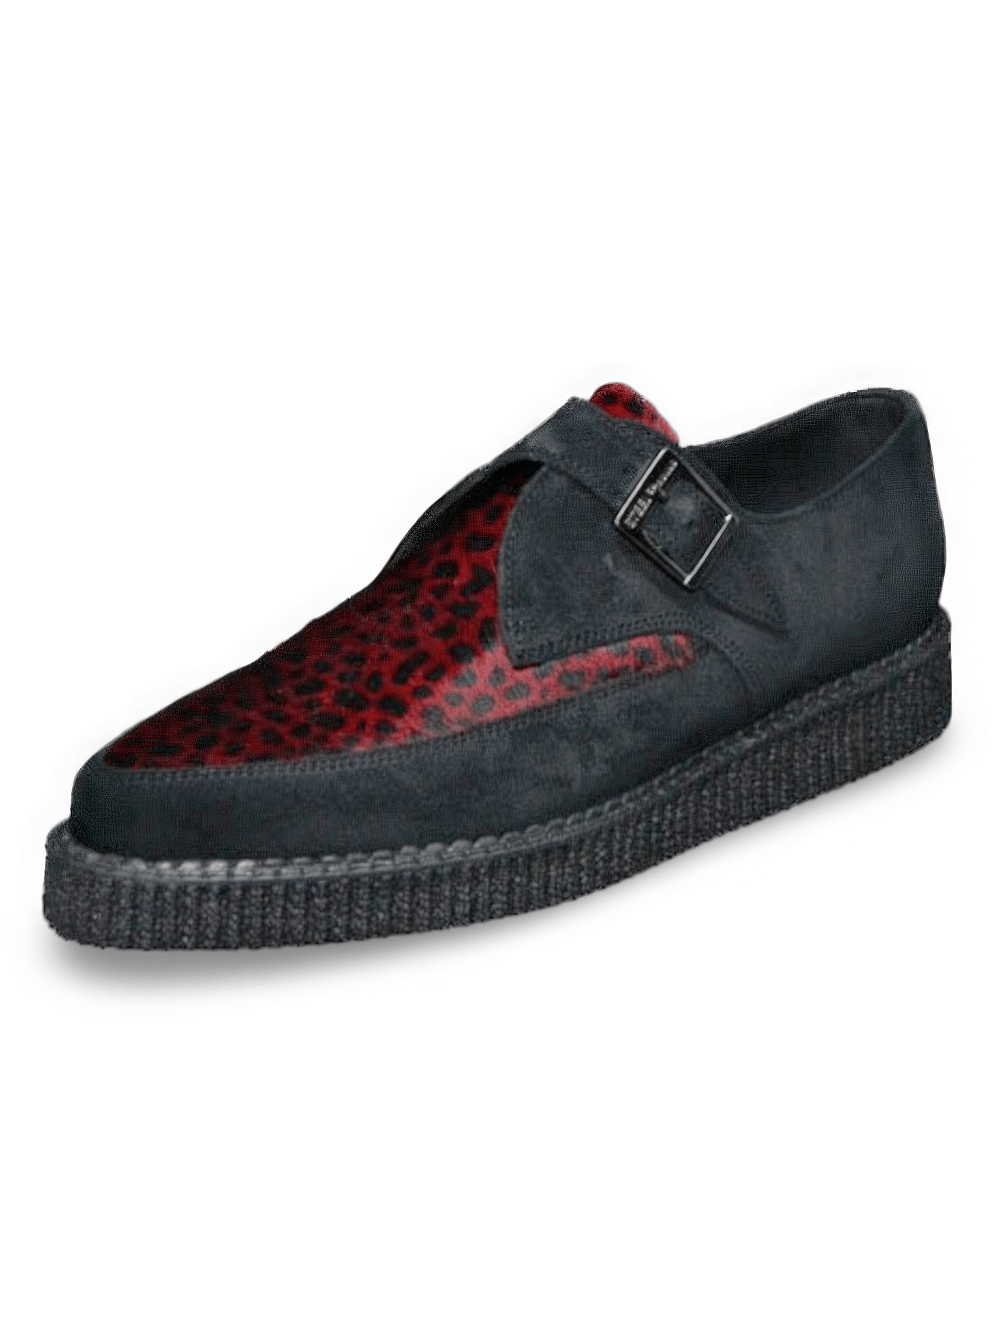 Black and Red Leopard Pointed Creeper with Buckle